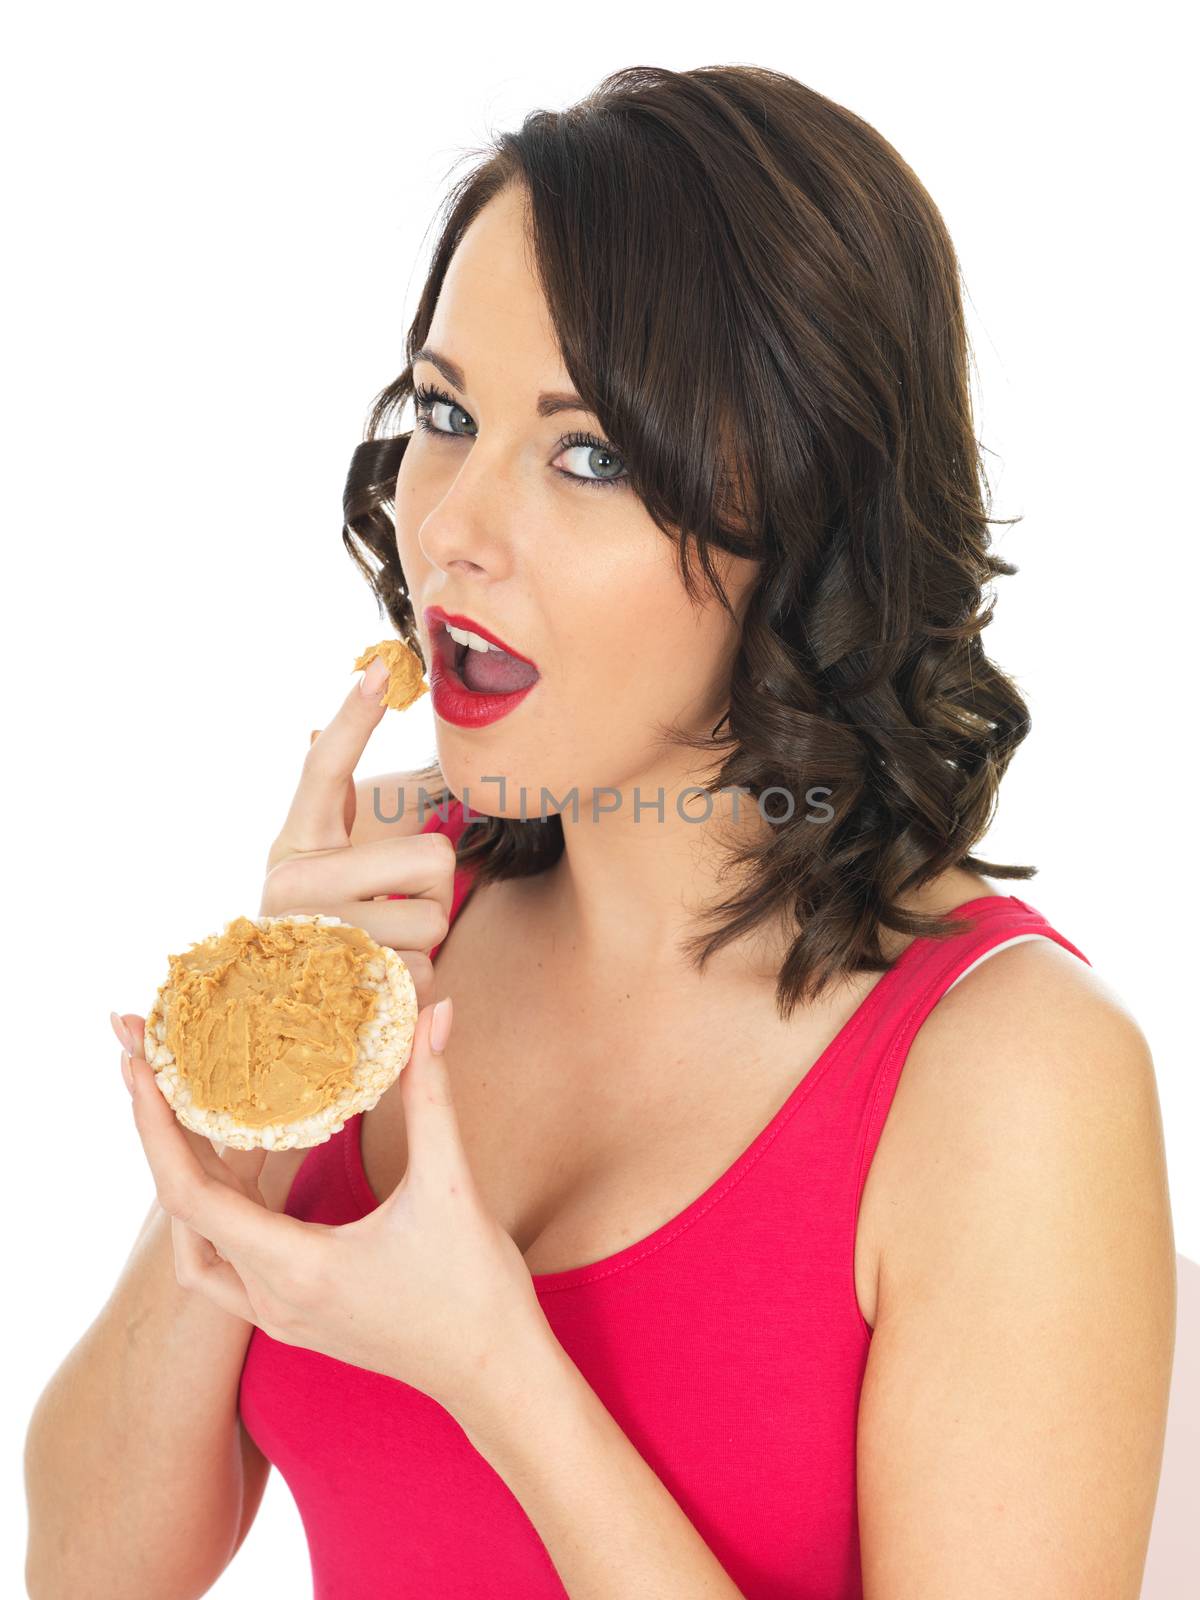 Attractive Young Woman Eating a Cracker with Peanut Butter Spread